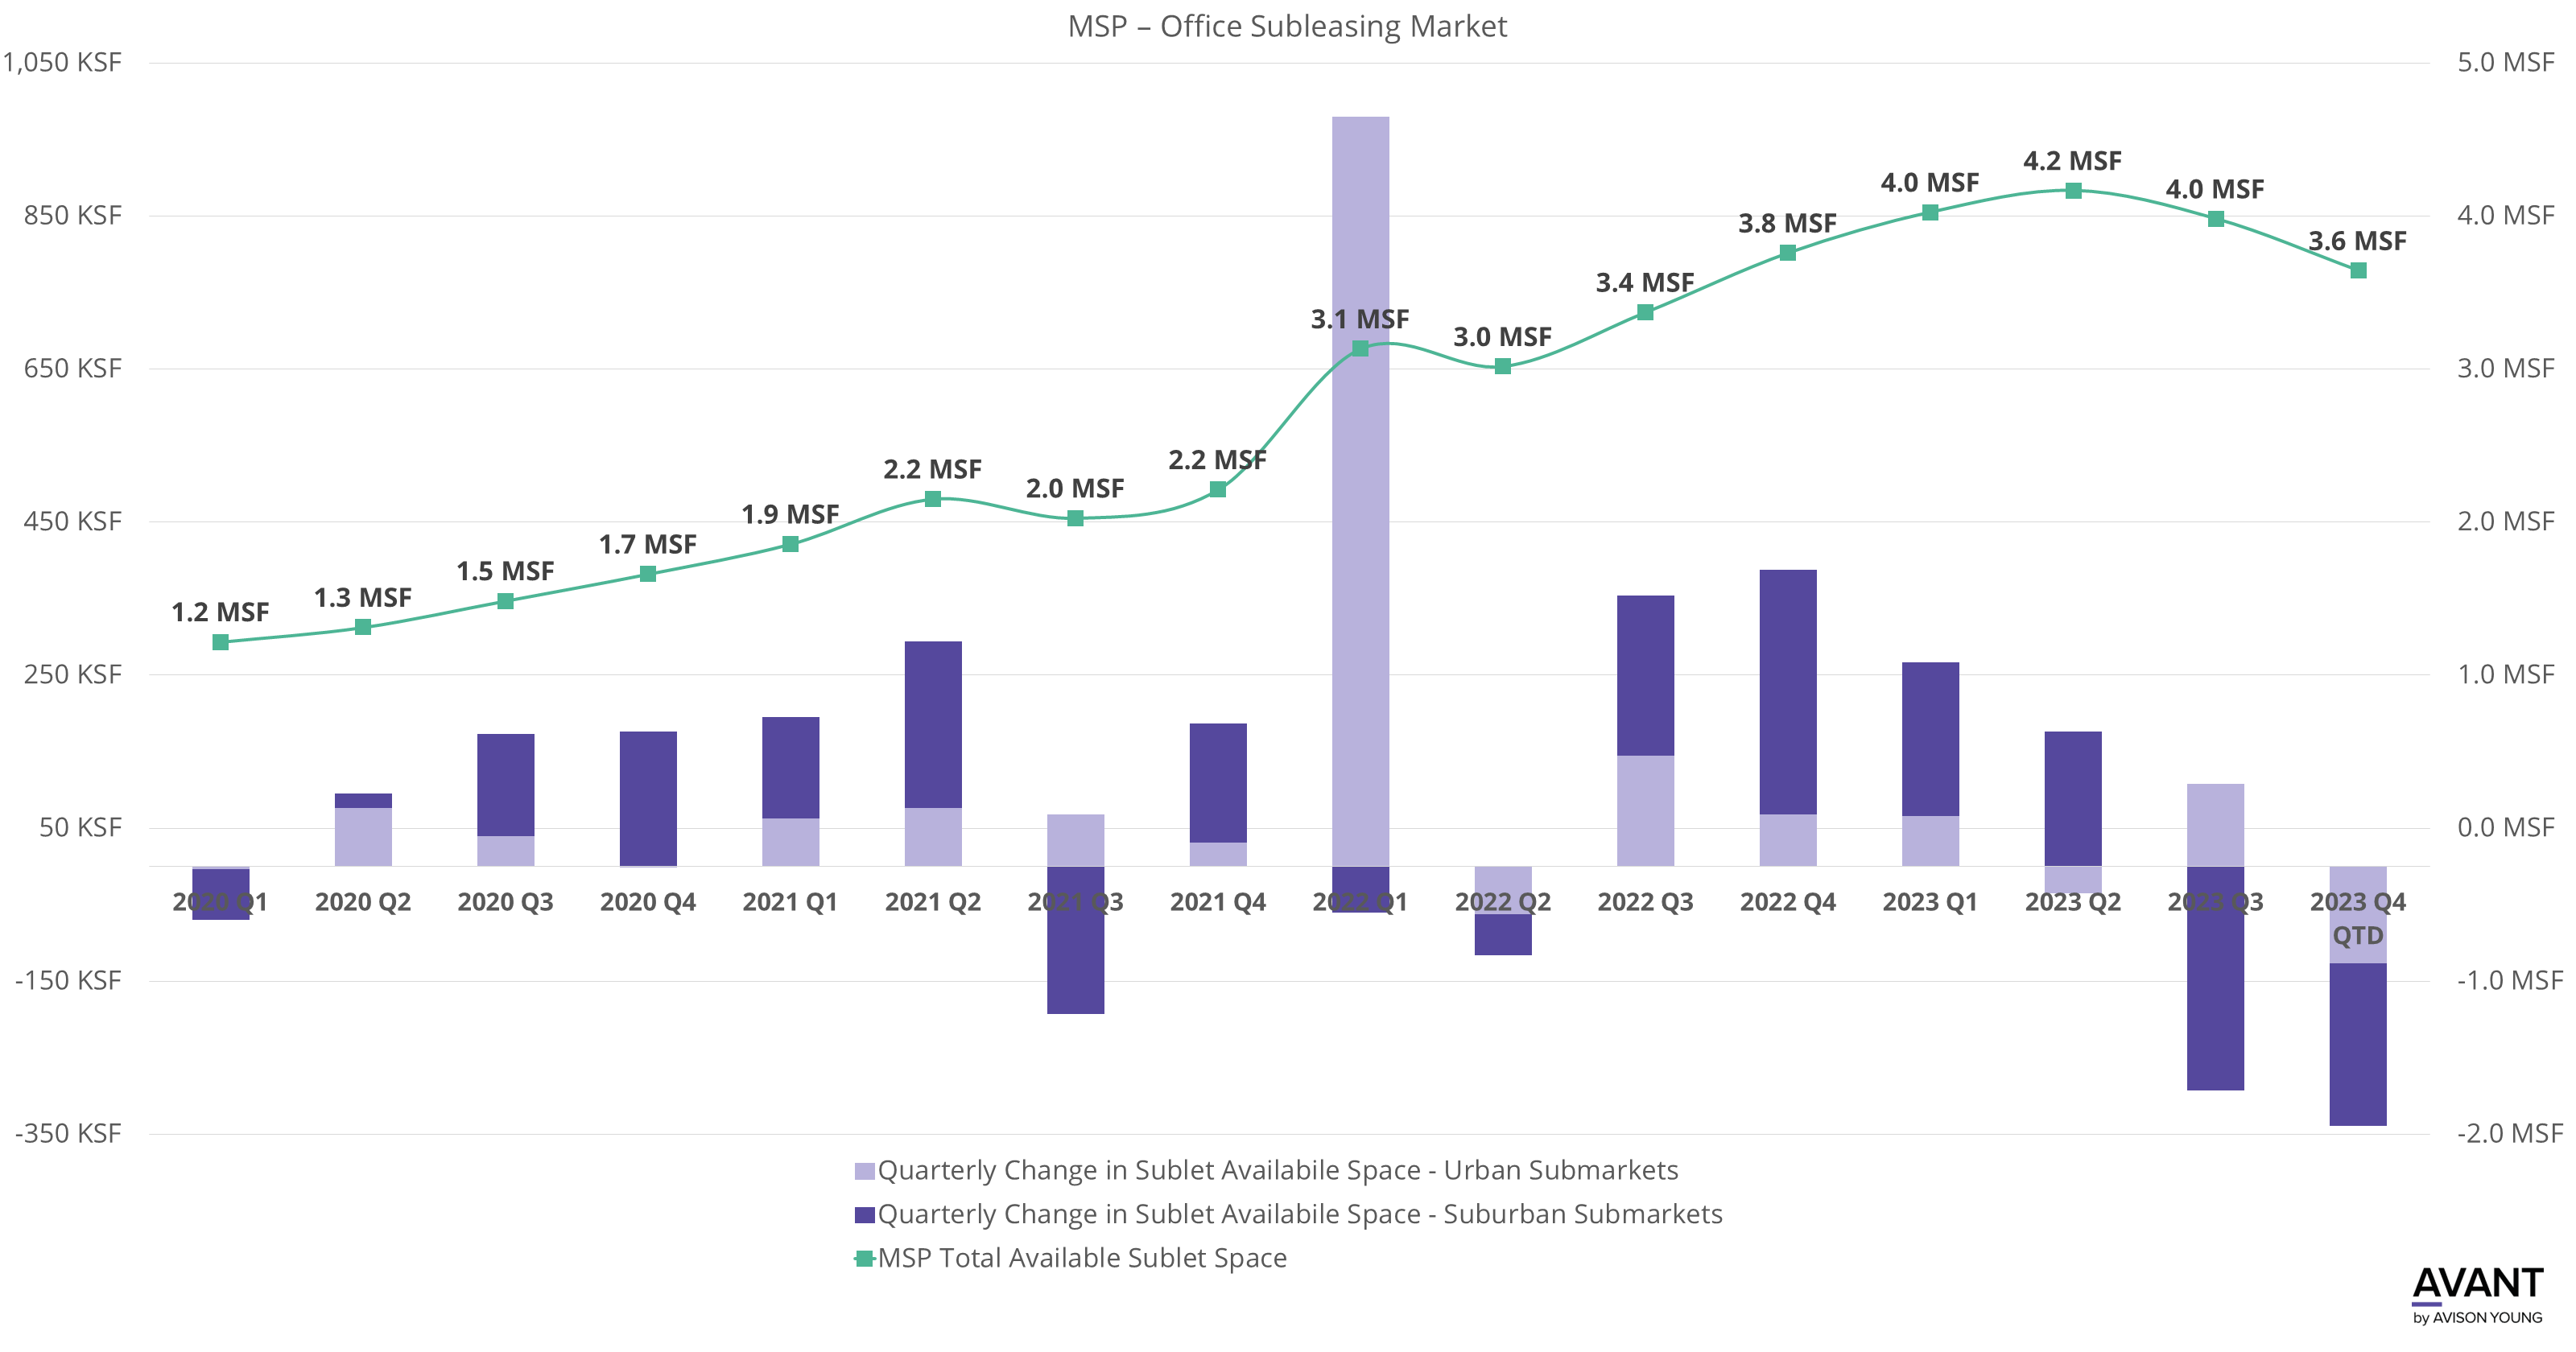 Chart shows the MSP office subleasing market activity since the start of 2020